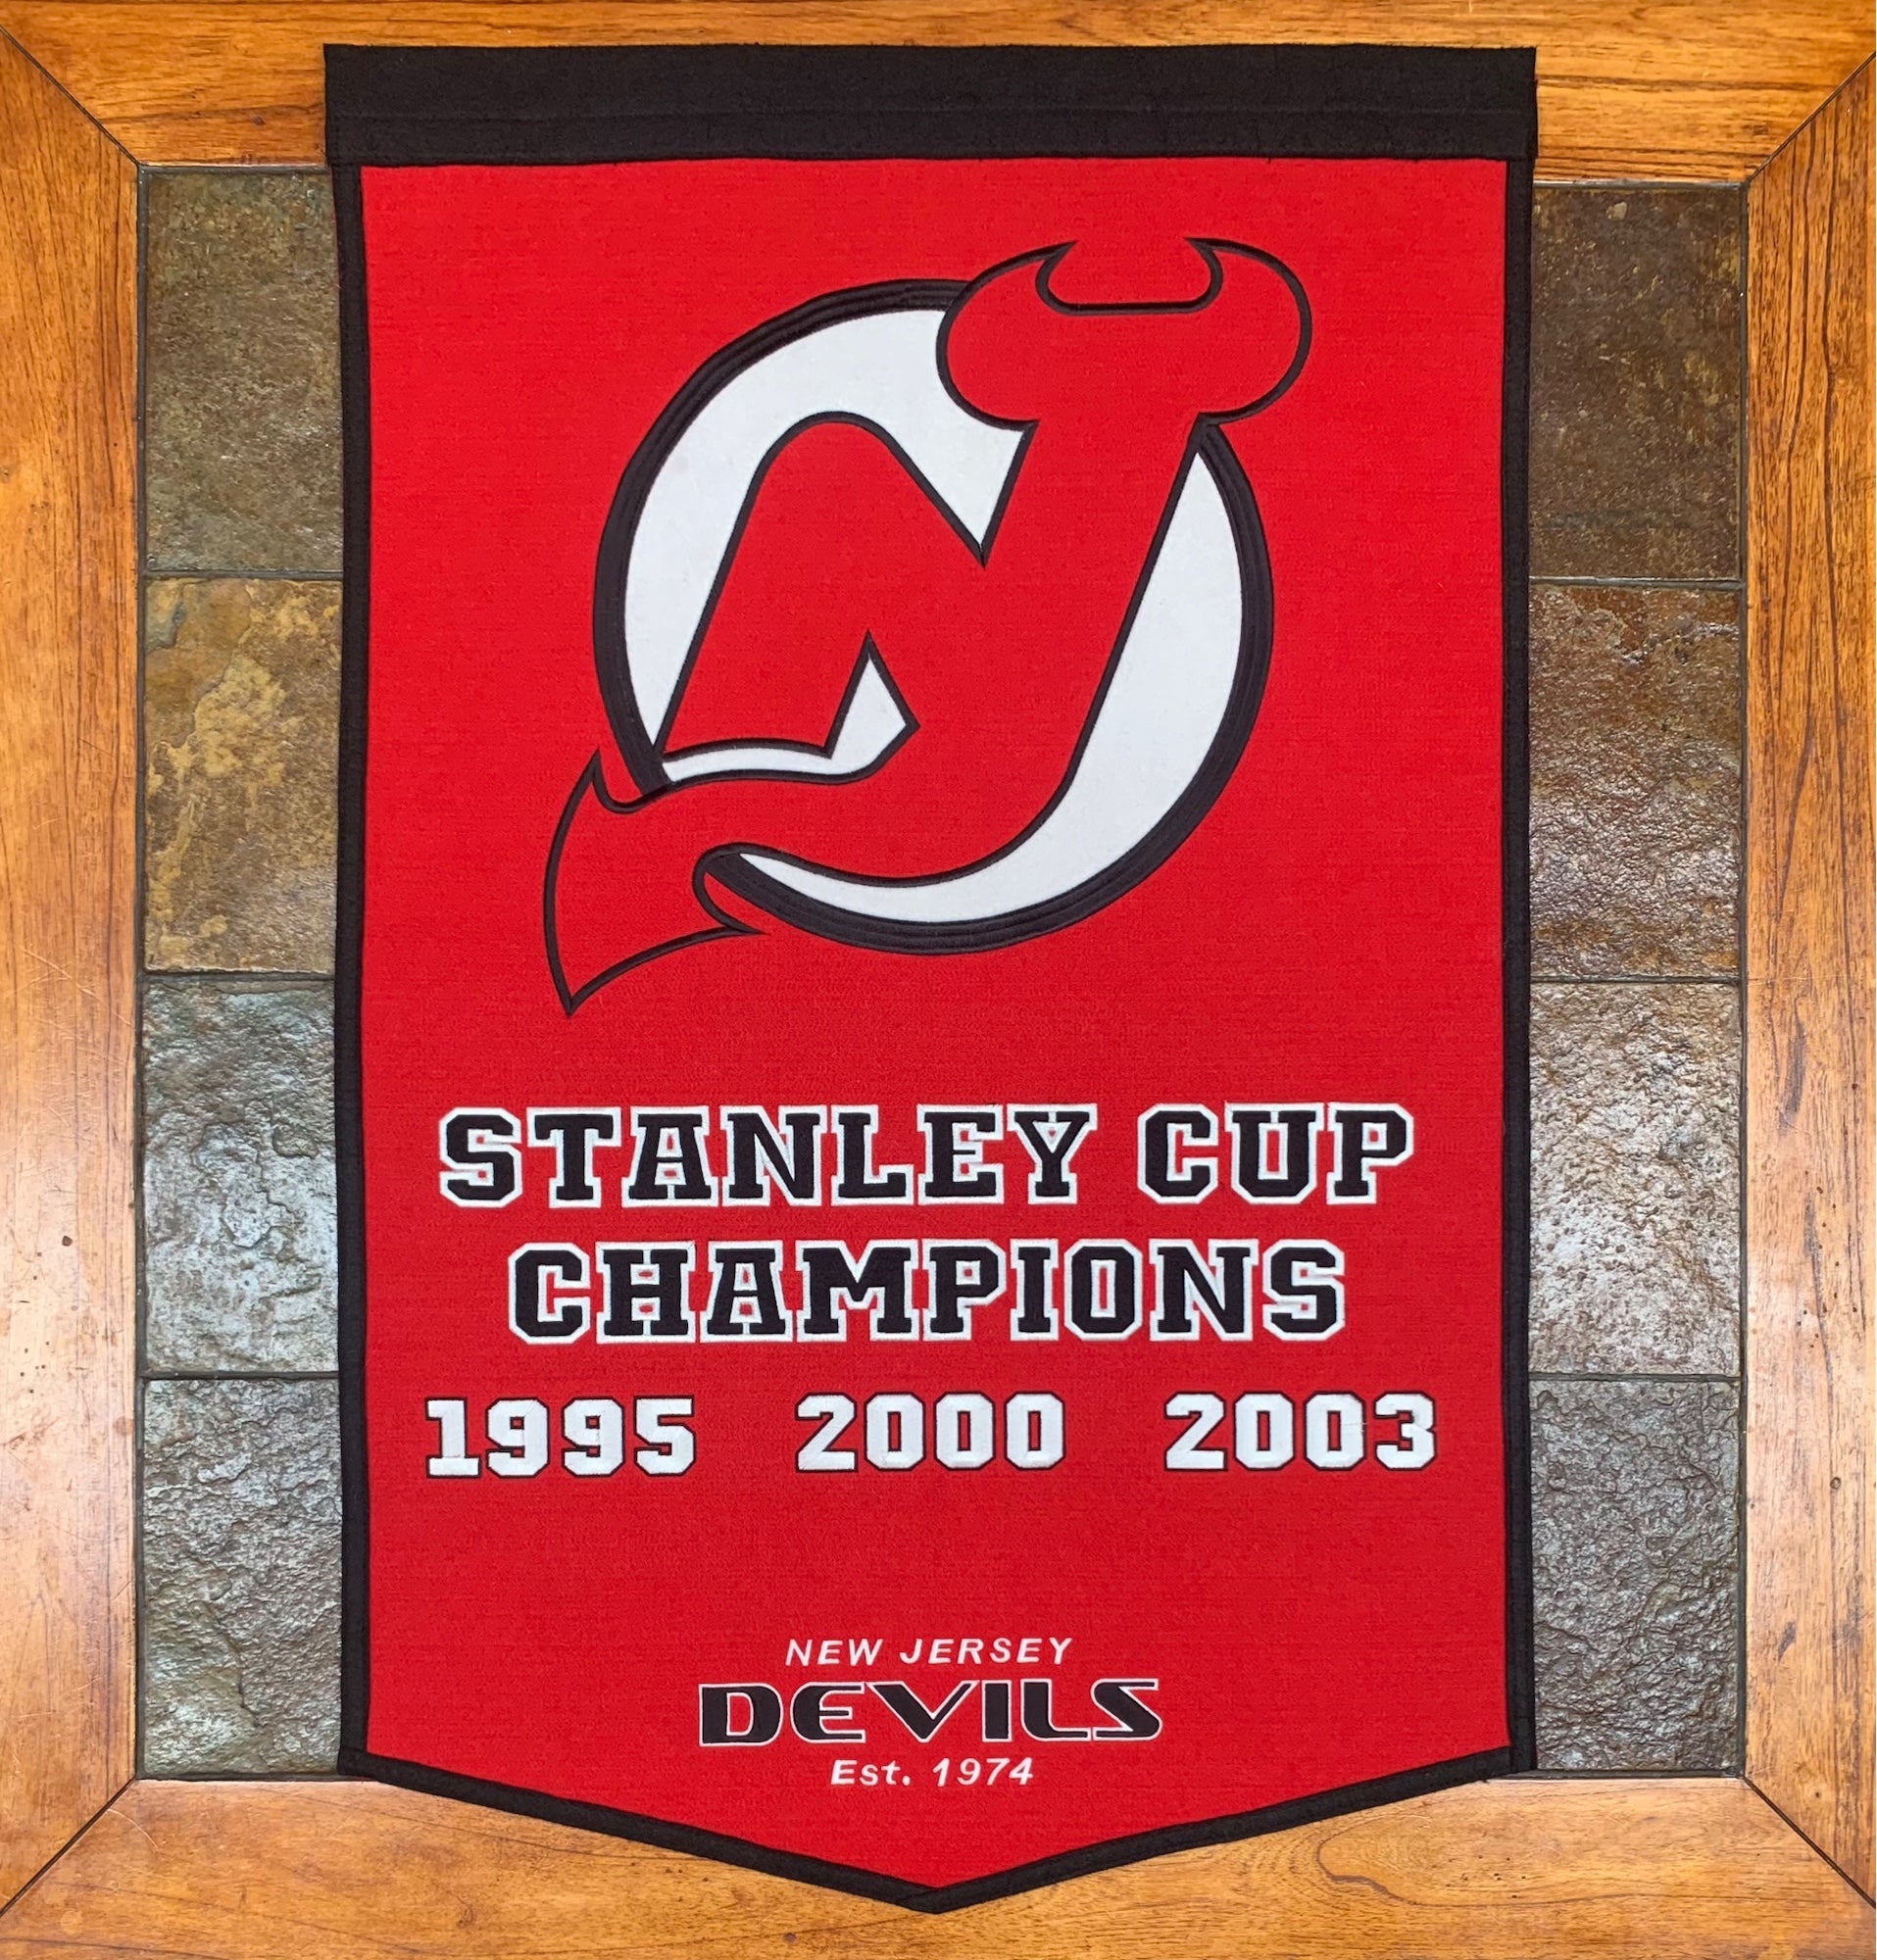 New Jersey Devils 1995 Stanley Cup Champions Felt Flag Pennant